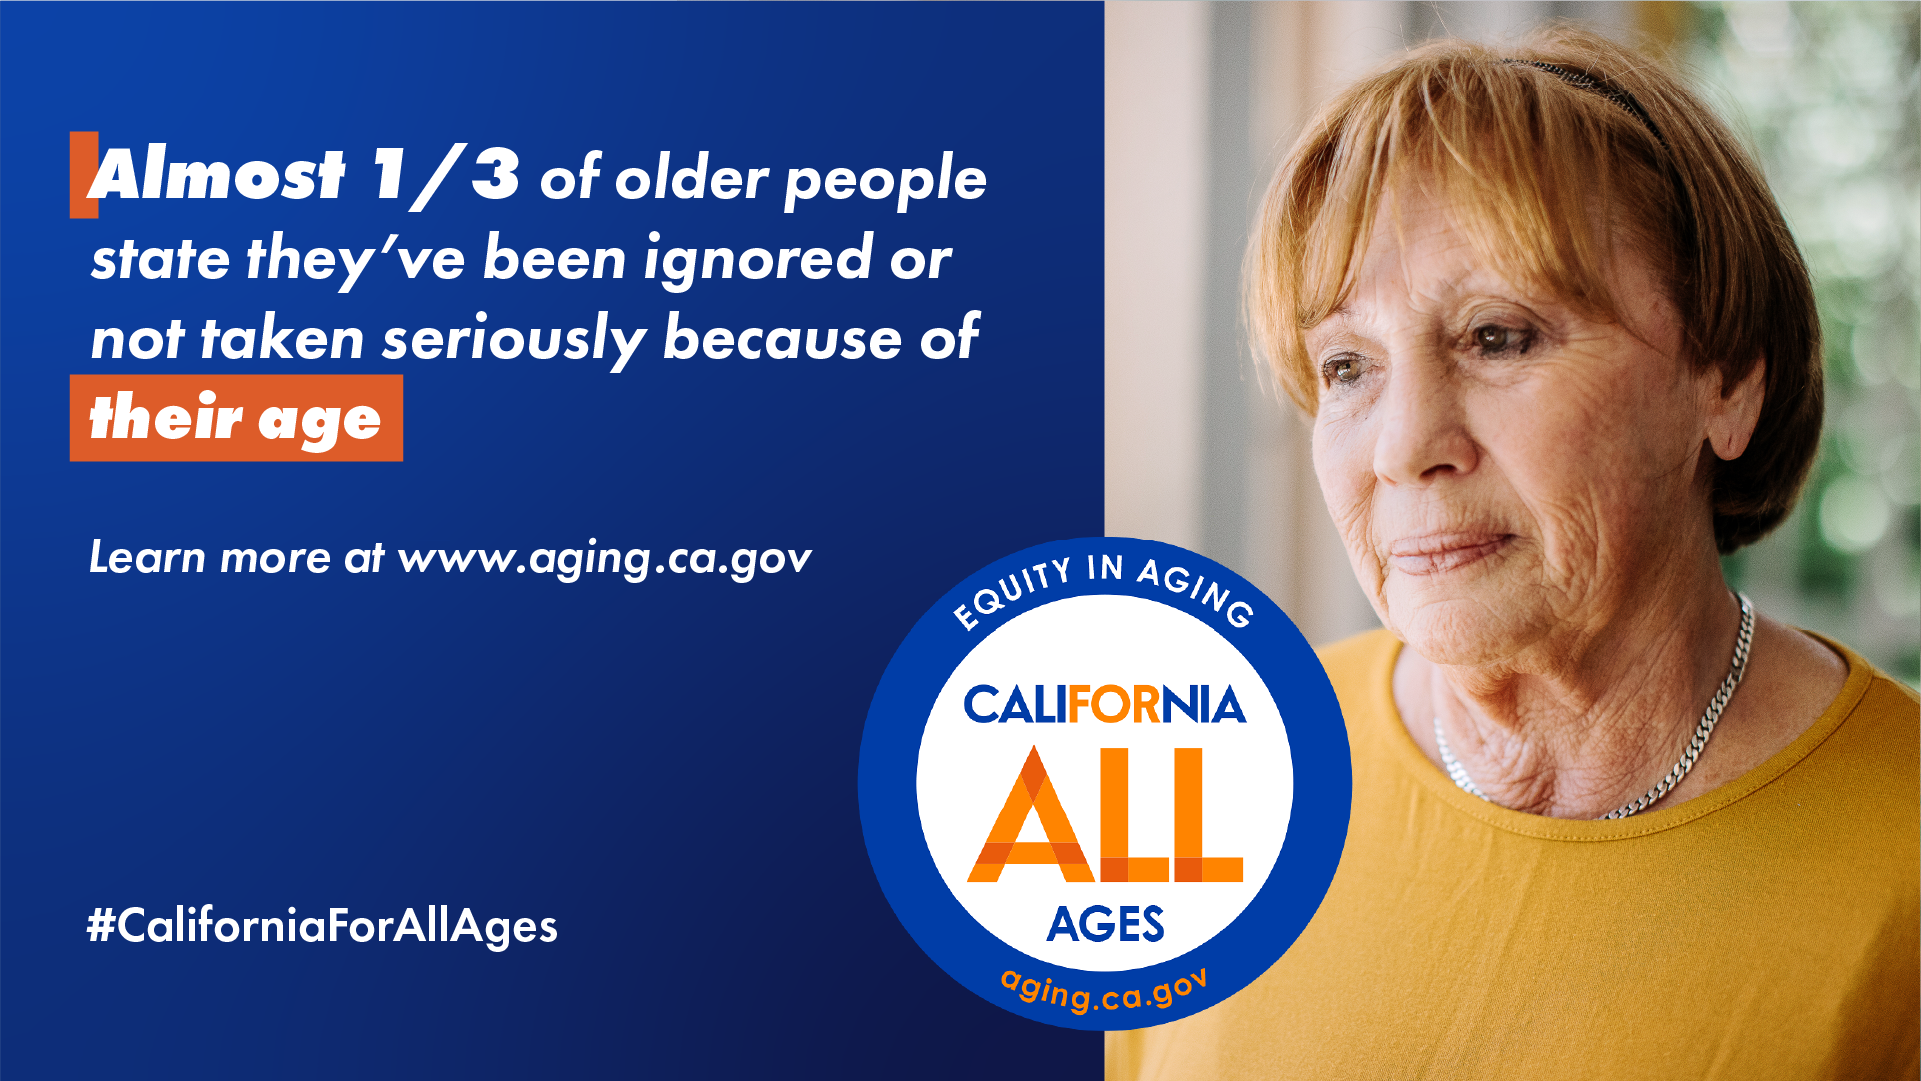 Almost 1/3 of older people state they’ve been ignored or not taken serious because of their age. California For All Ages logo, #CaliforniaForAllAges. Photo of older adult woman looking off into the distance.